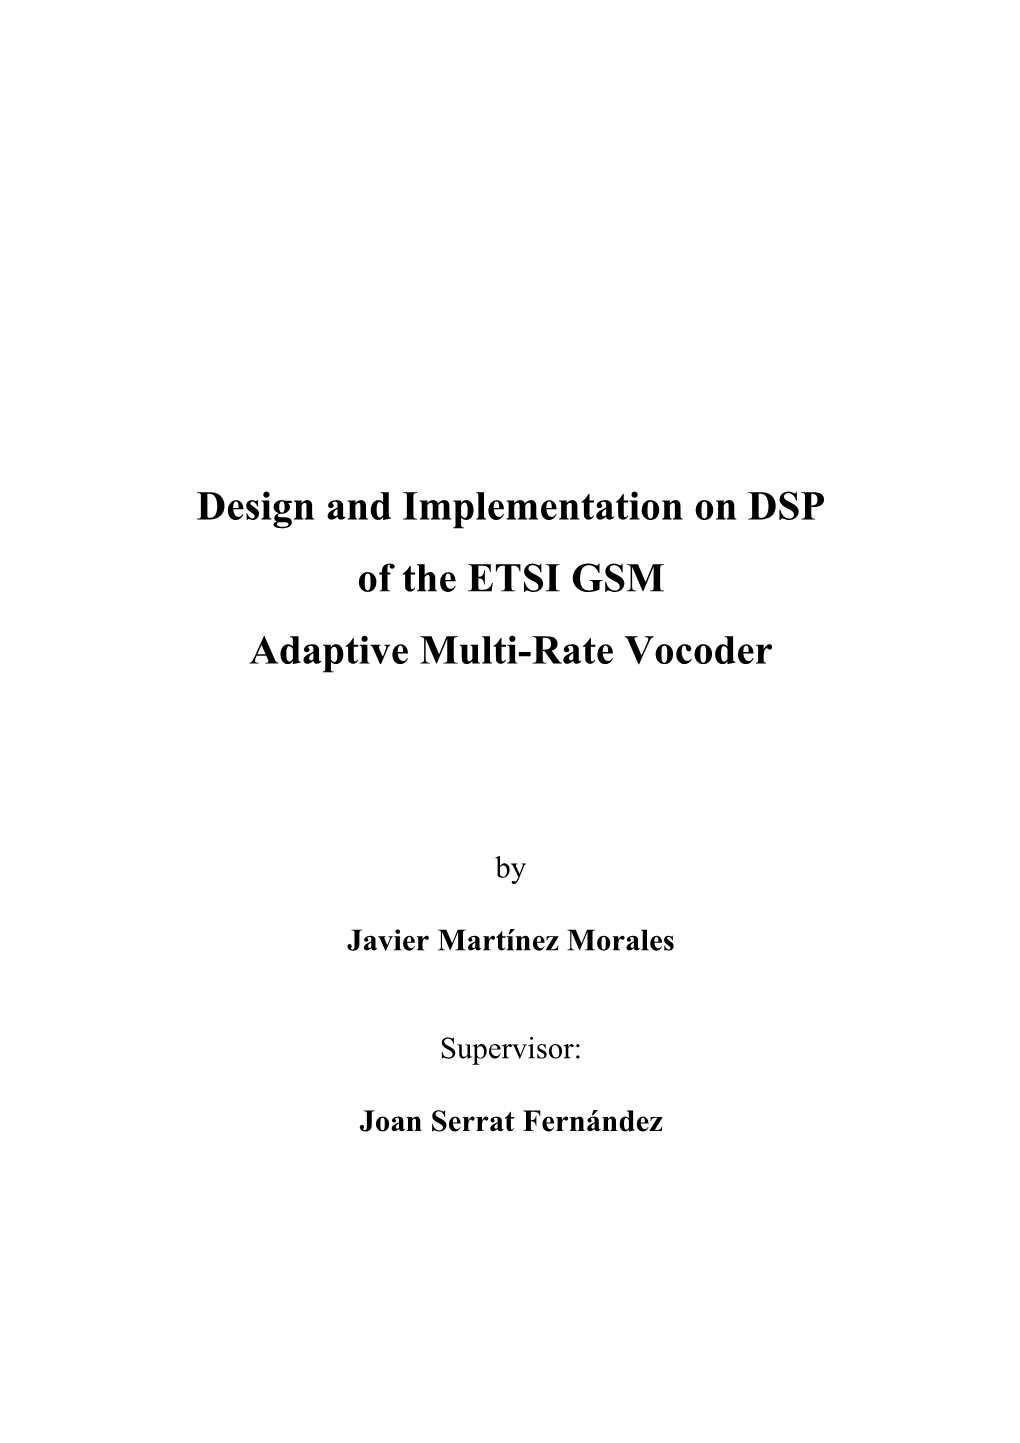 Design and Implementation on DSP of the ETSI GSM Adaptive Multi-Rate Vocoder